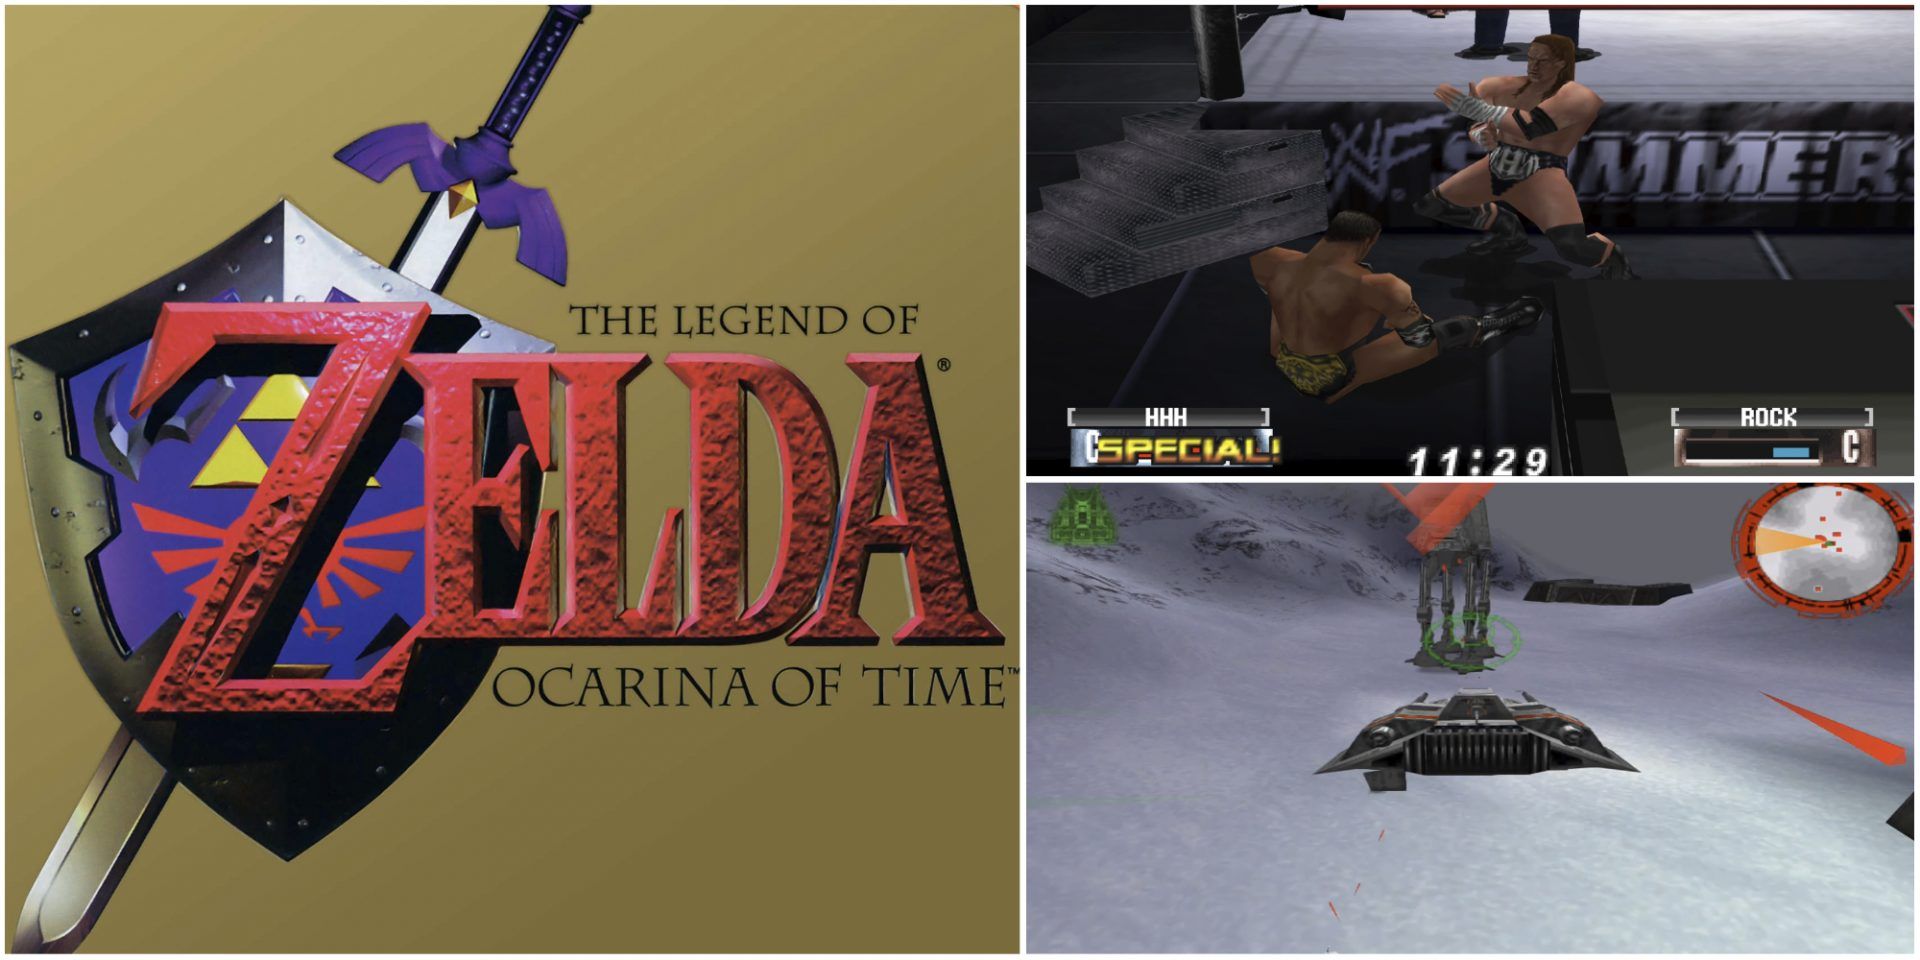 The Legend Of Zelda Ocarina Of Time Cover Art, WWF No Mercy And Star Wars Rogue Squardron Gameplay